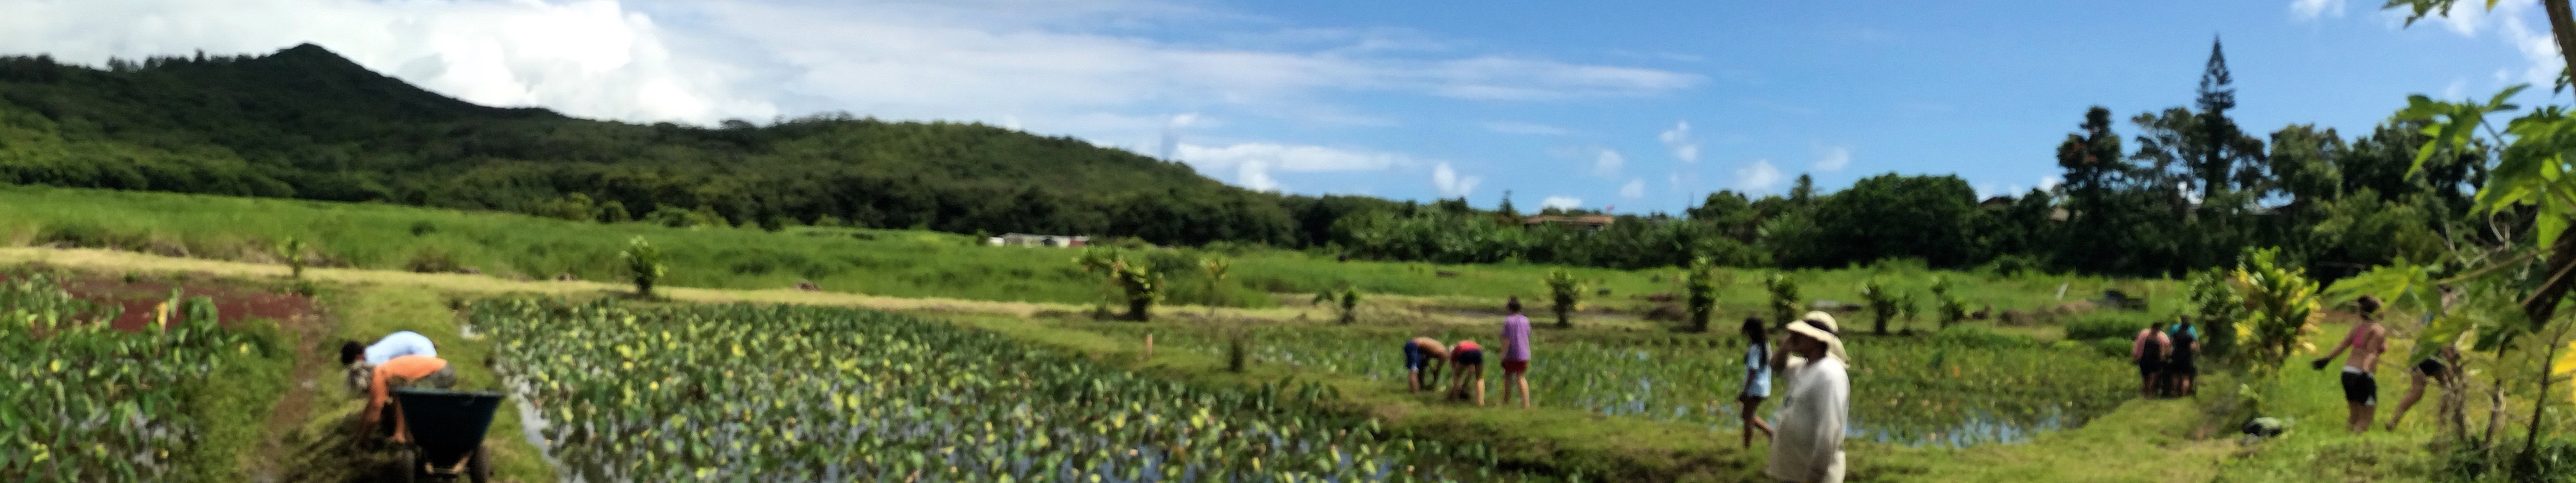 Taro field experience with Pacific American Foundation's NALU Studies project.